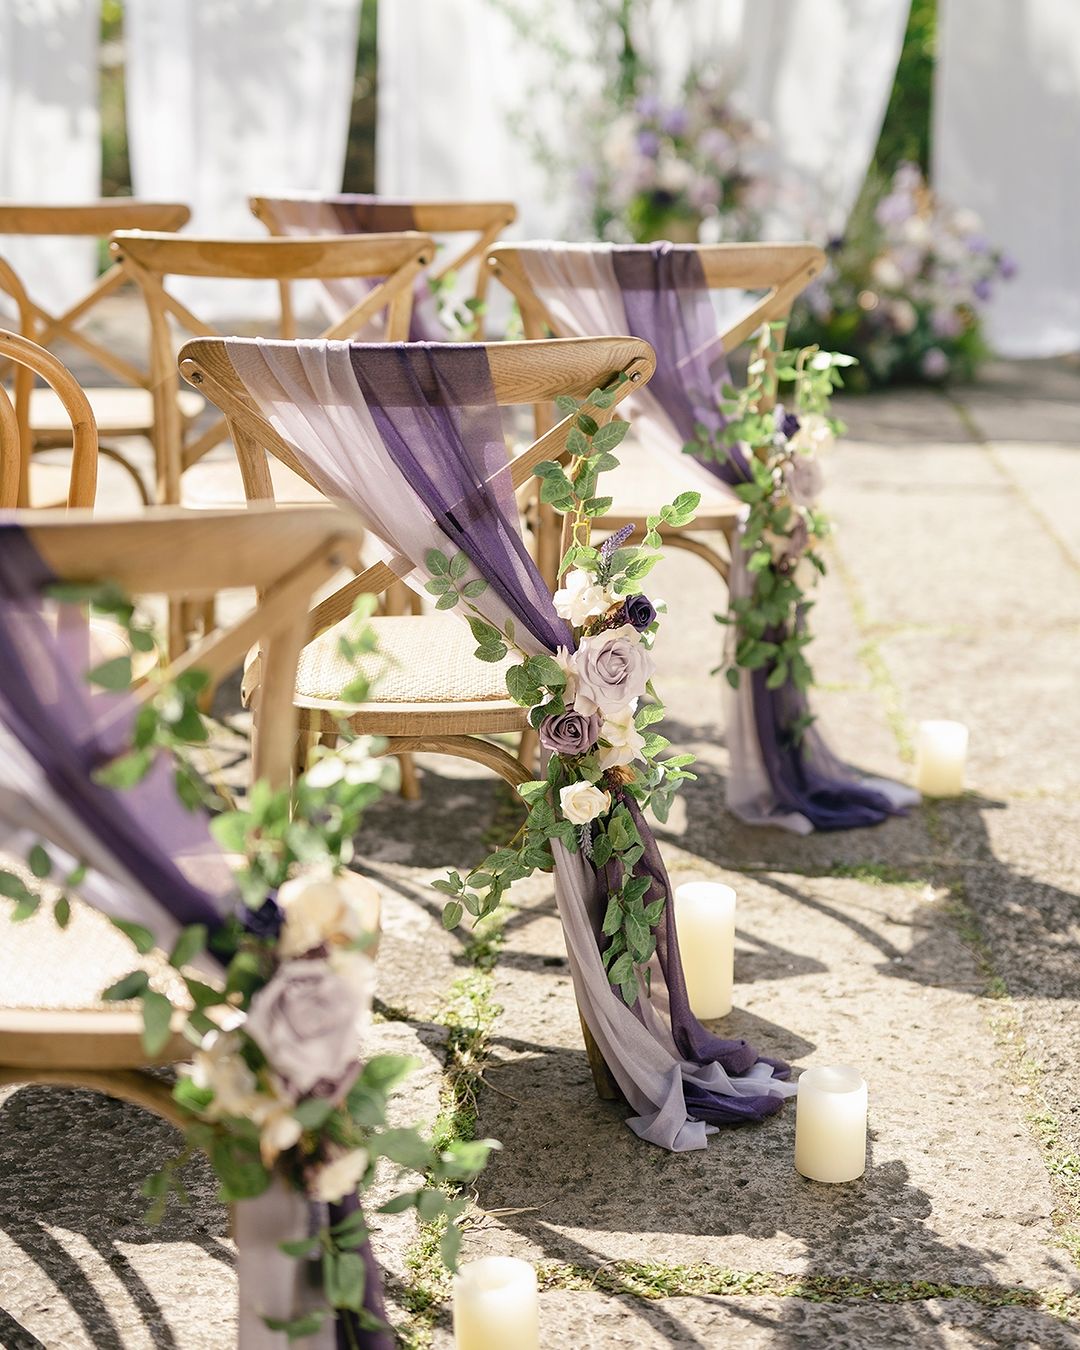 This Rose Morning Amethyst Wedding Chair Wreath is the perfect addition to your wedding venue. Made of soft roses, amethyst and green leaves, it will add elegance and romance to your venue. Garlands are easy to install and can be used on any chair. It is the perfect touch for your wedding and will wow your guests.